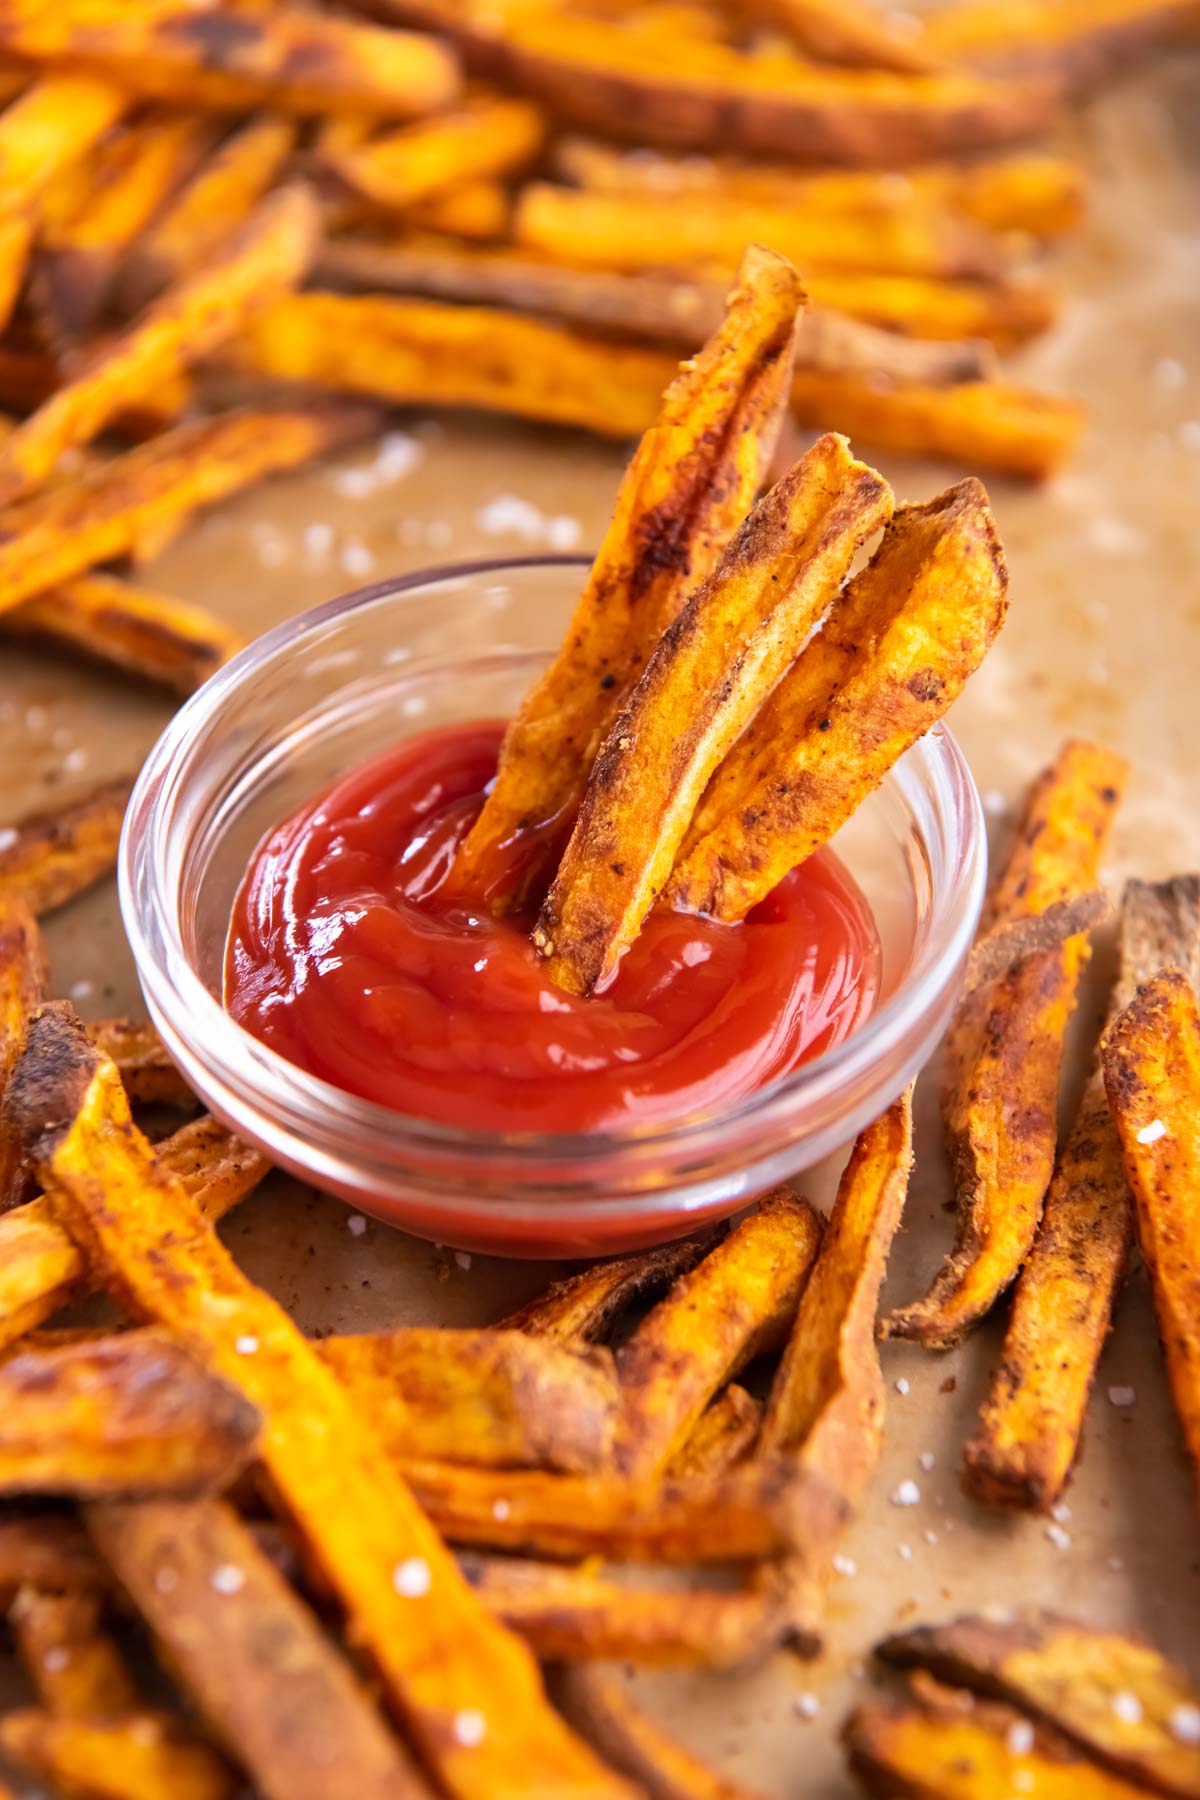 Three sweet potato fries dipped in small dish of ketchup.